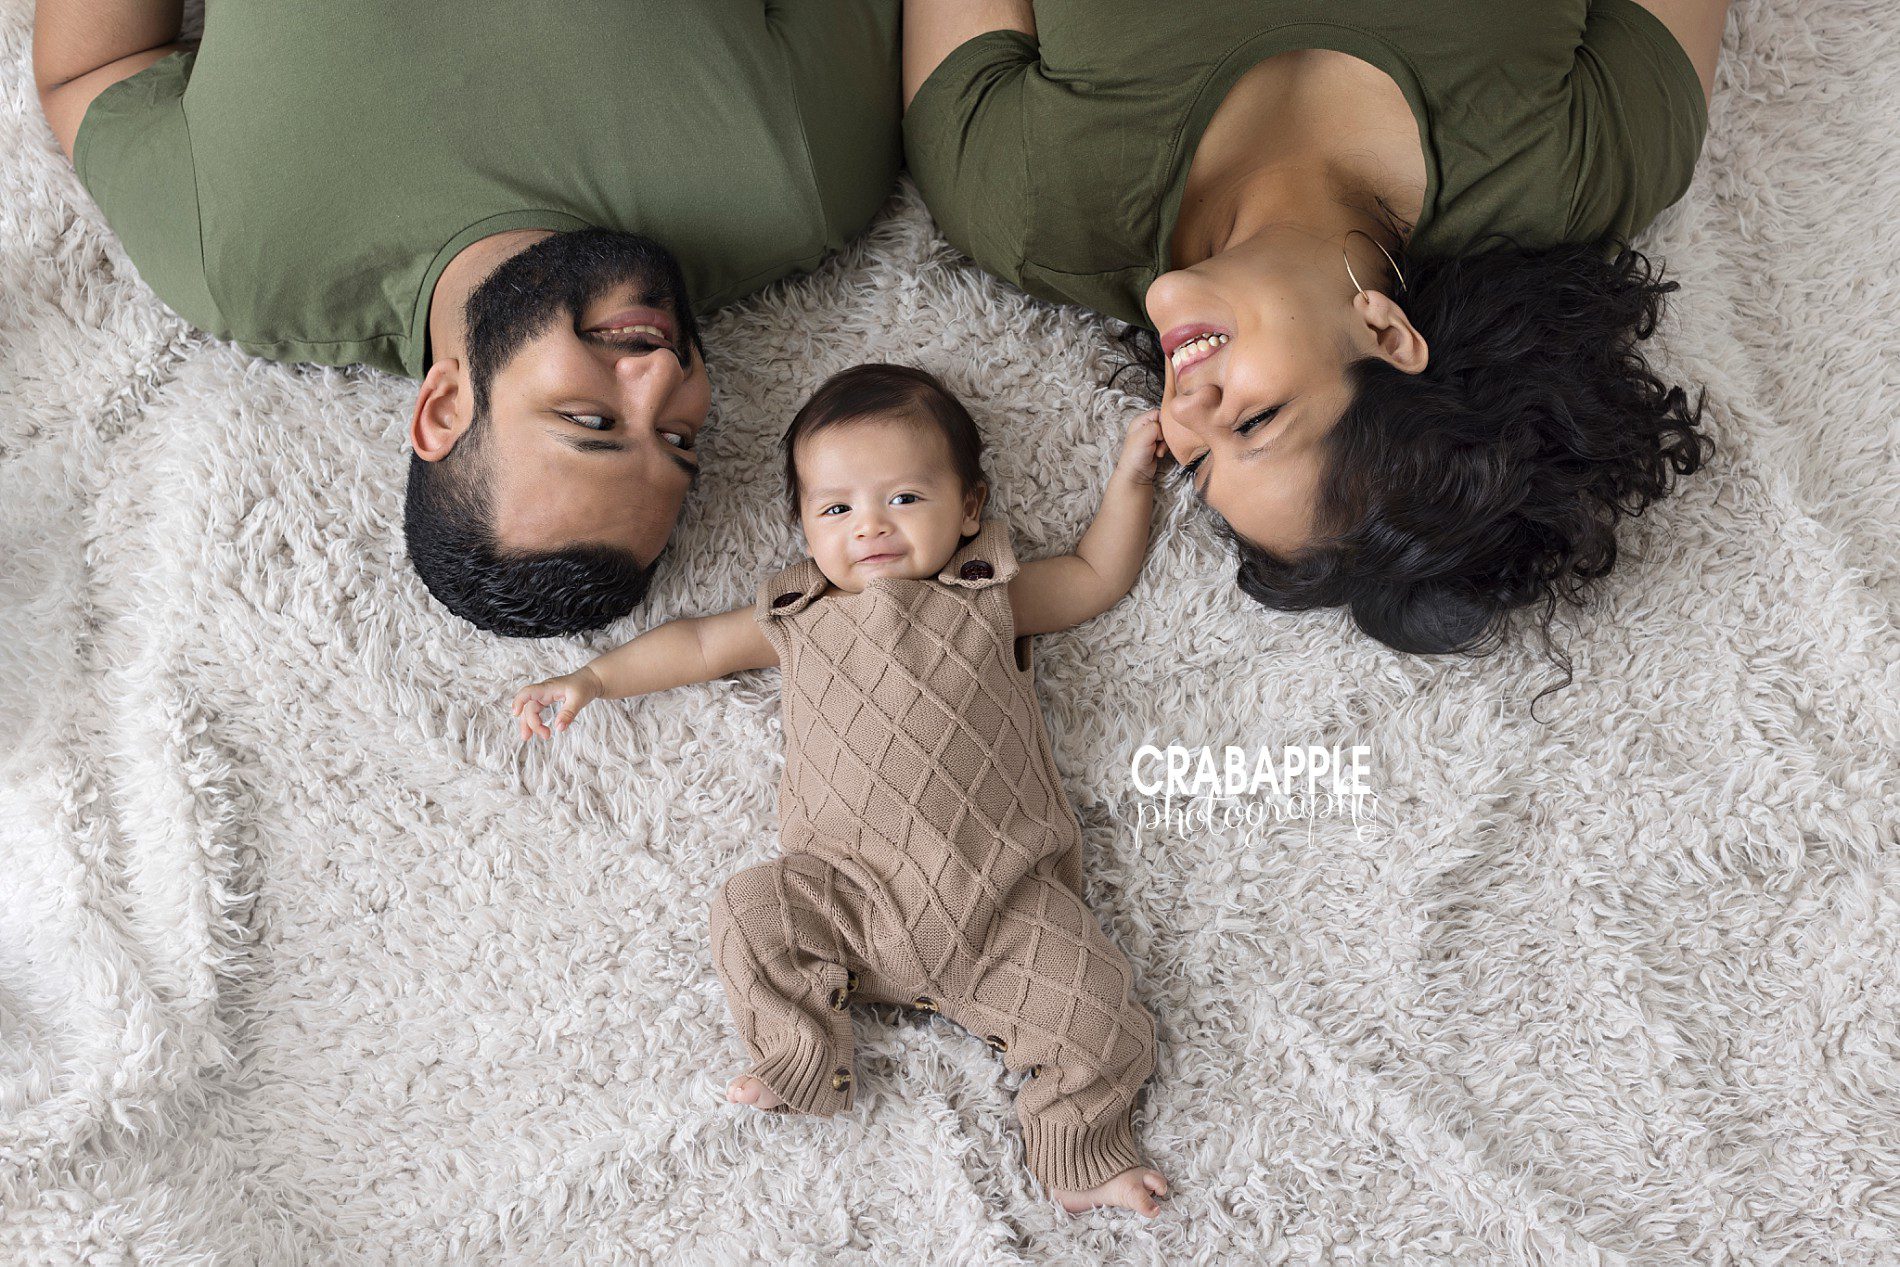 pose ideas for baby and parent photos